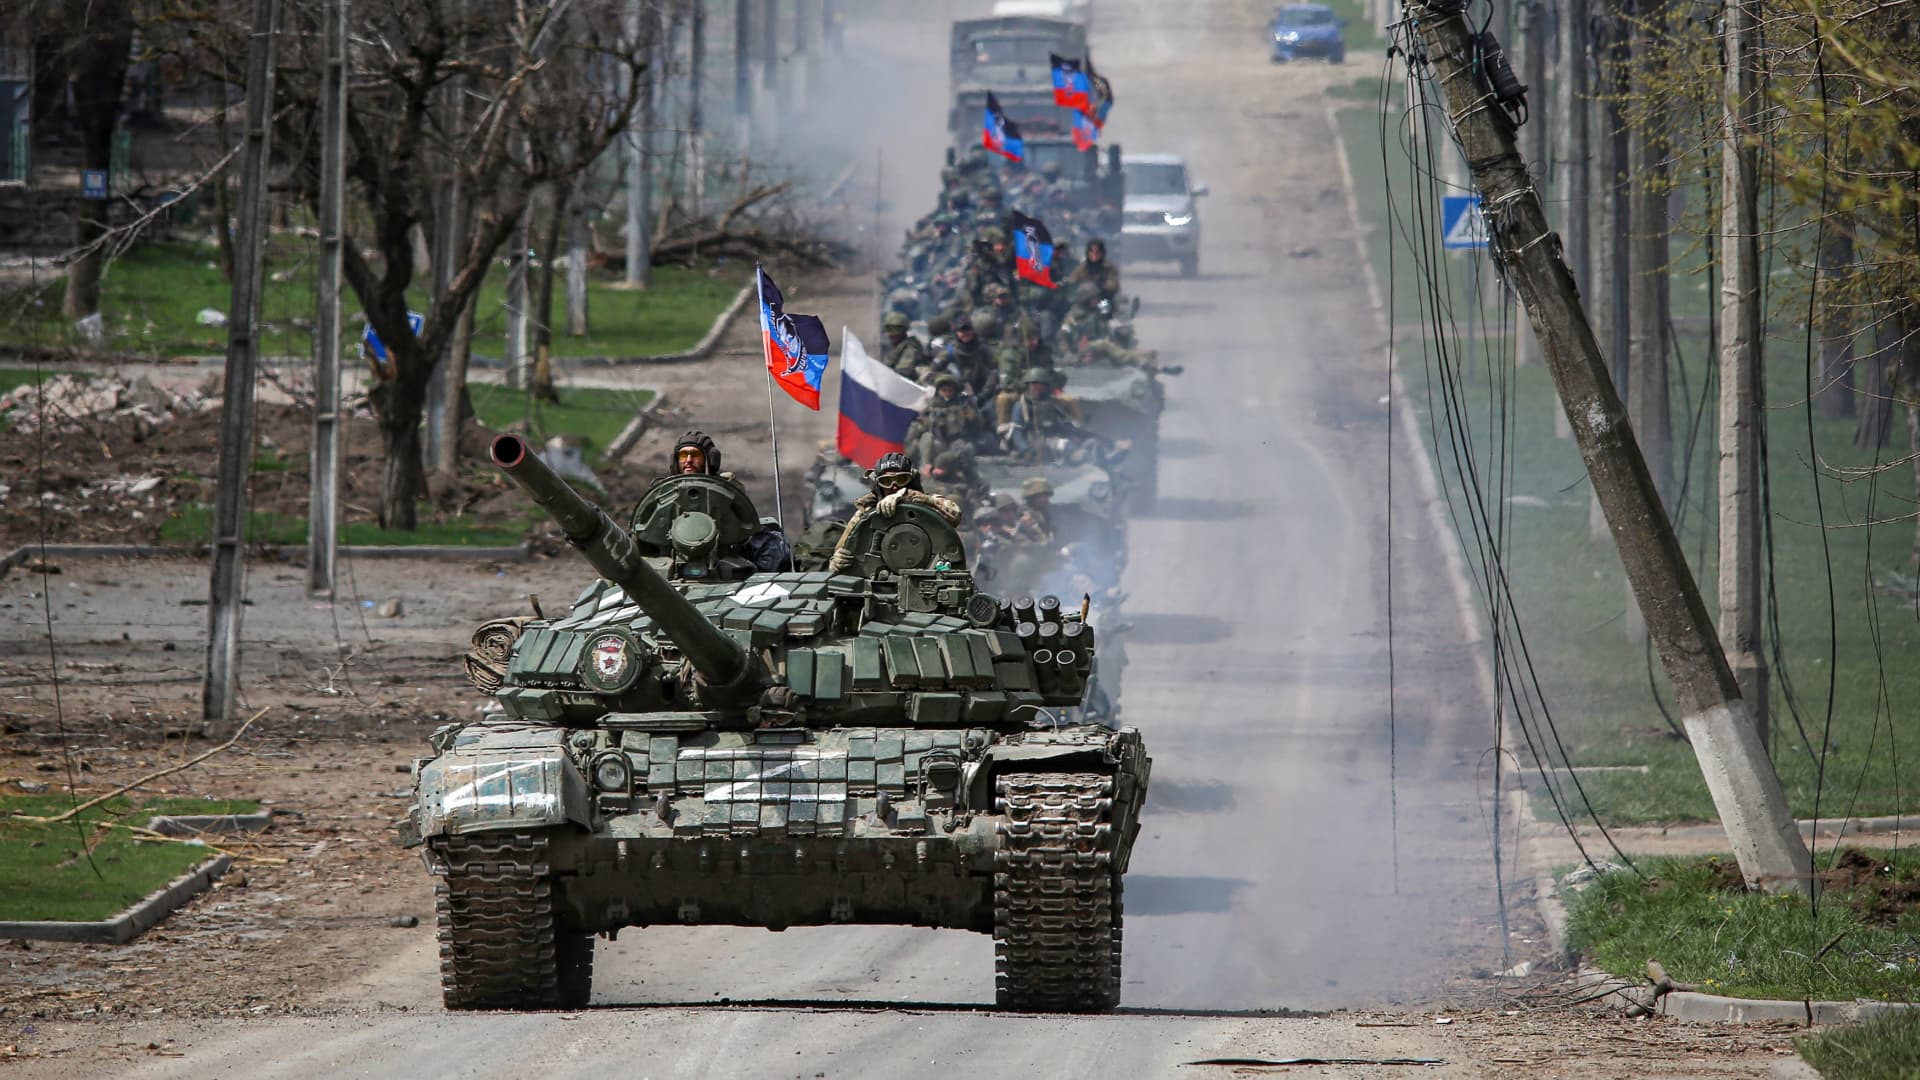 An armoured convoy of pro-Russian troops moves along a road during Ukraine-Russia conflict in the southern port city of Mariupol, Ukraine April 21, 2022.